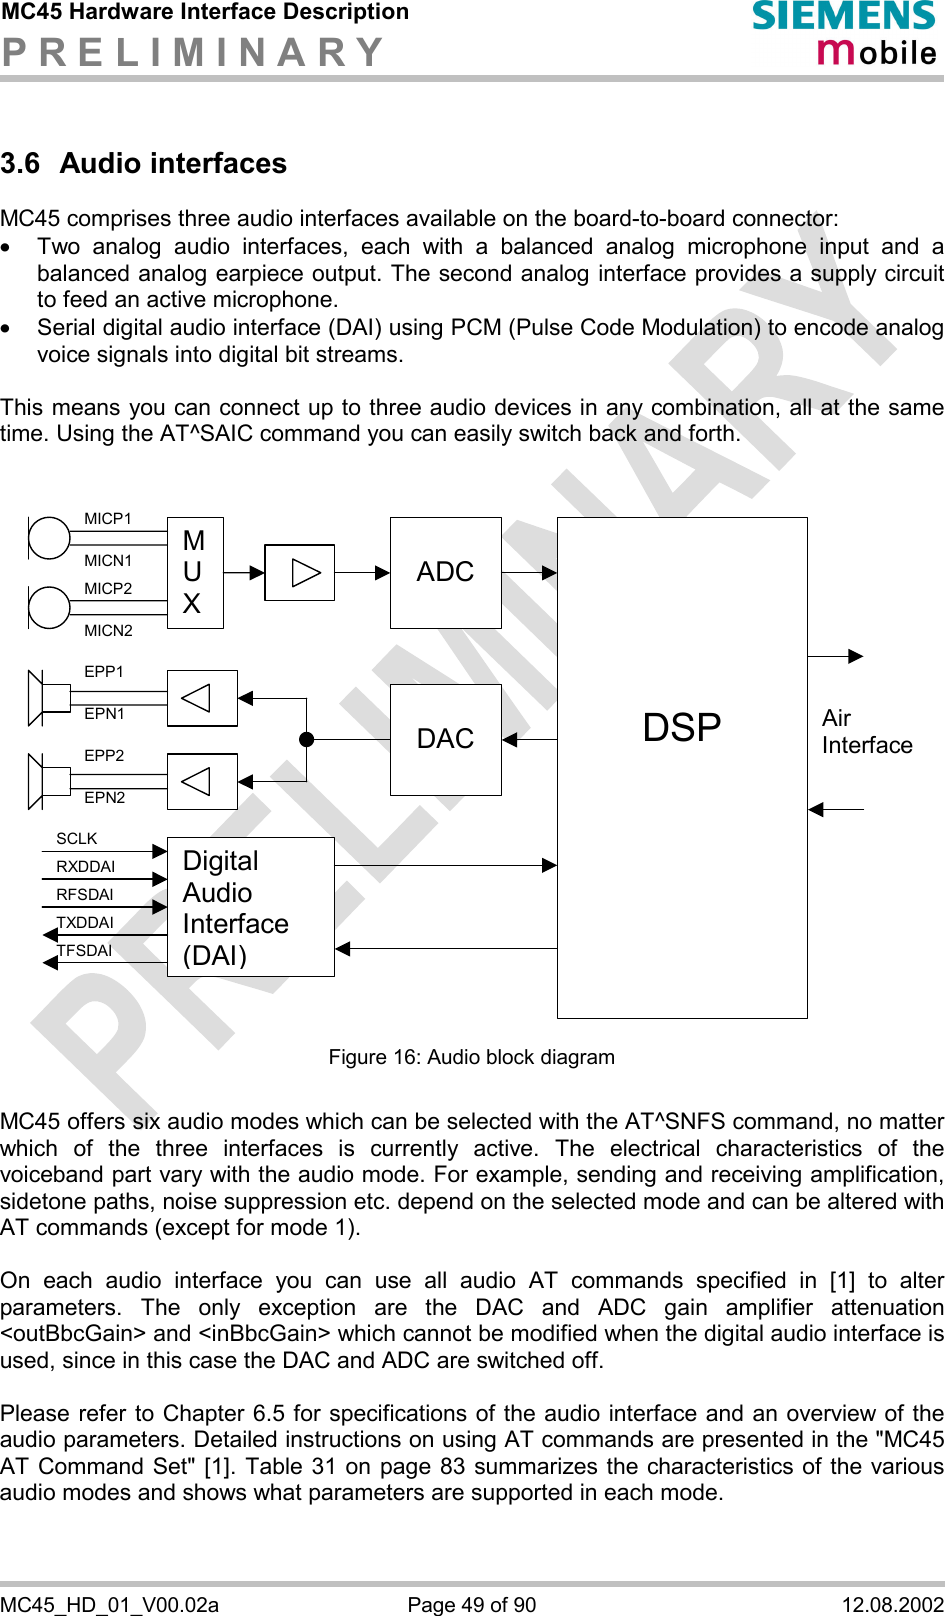 MC45 Hardware Interface Description P R E L I M I N A R Y      MC45_HD_01_V00.02a  Page 49 of 90  12.08.2002 3.6 Audio interfaces MC45 comprises three audio interfaces available on the board-to-board connector:  ·  Two analog audio interfaces, each with a balanced analog microphone input and a balanced analog earpiece output. The second analog interface provides a supply circuit to feed an active microphone. ·  Serial digital audio interface (DAI) using PCM (Pulse Code Modulation) to encode analog voice signals into digital bit streams.  This means you can connect up to three audio devices in any combination, all at the same time. Using the AT^SAIC command you can easily switch back and forth.    M U X  ADC    DSP  DACAir InterfaceDigital Audio Interface (DAI) MICP1 MICN1 MICP2 MICN2 EPP1 EPN1 EPP2 EPN2 SCLK RXDDAI TFSDAI RFSDAI TXDDAI  Figure 16: Audio block diagram  MC45 offers six audio modes which can be selected with the AT^SNFS command, no matter which of the three interfaces is currently active. The electrical characteristics of the voiceband part vary with the audio mode. For example, sending and receiving amplification, sidetone paths, noise suppression etc. depend on the selected mode and can be altered with AT commands (except for mode 1).  On each audio interface you can use all audio AT commands specified in [1] to alter parameters. The only exception are the DAC and ADC gain amplifier attenuation &lt;outBbcGain&gt; and &lt;inBbcGain&gt; which cannot be modified when the digital audio interface is used, since in this case the DAC and ADC are switched off.  Please refer to Chapter 6.5 for specifications of the audio interface and an overview of the audio parameters. Detailed instructions on using AT commands are presented in the &quot;MC45 AT Command Set&quot; [1]. Table 31 on page 83 summarizes the characteristics of the various audio modes and shows what parameters are supported in each mode.   